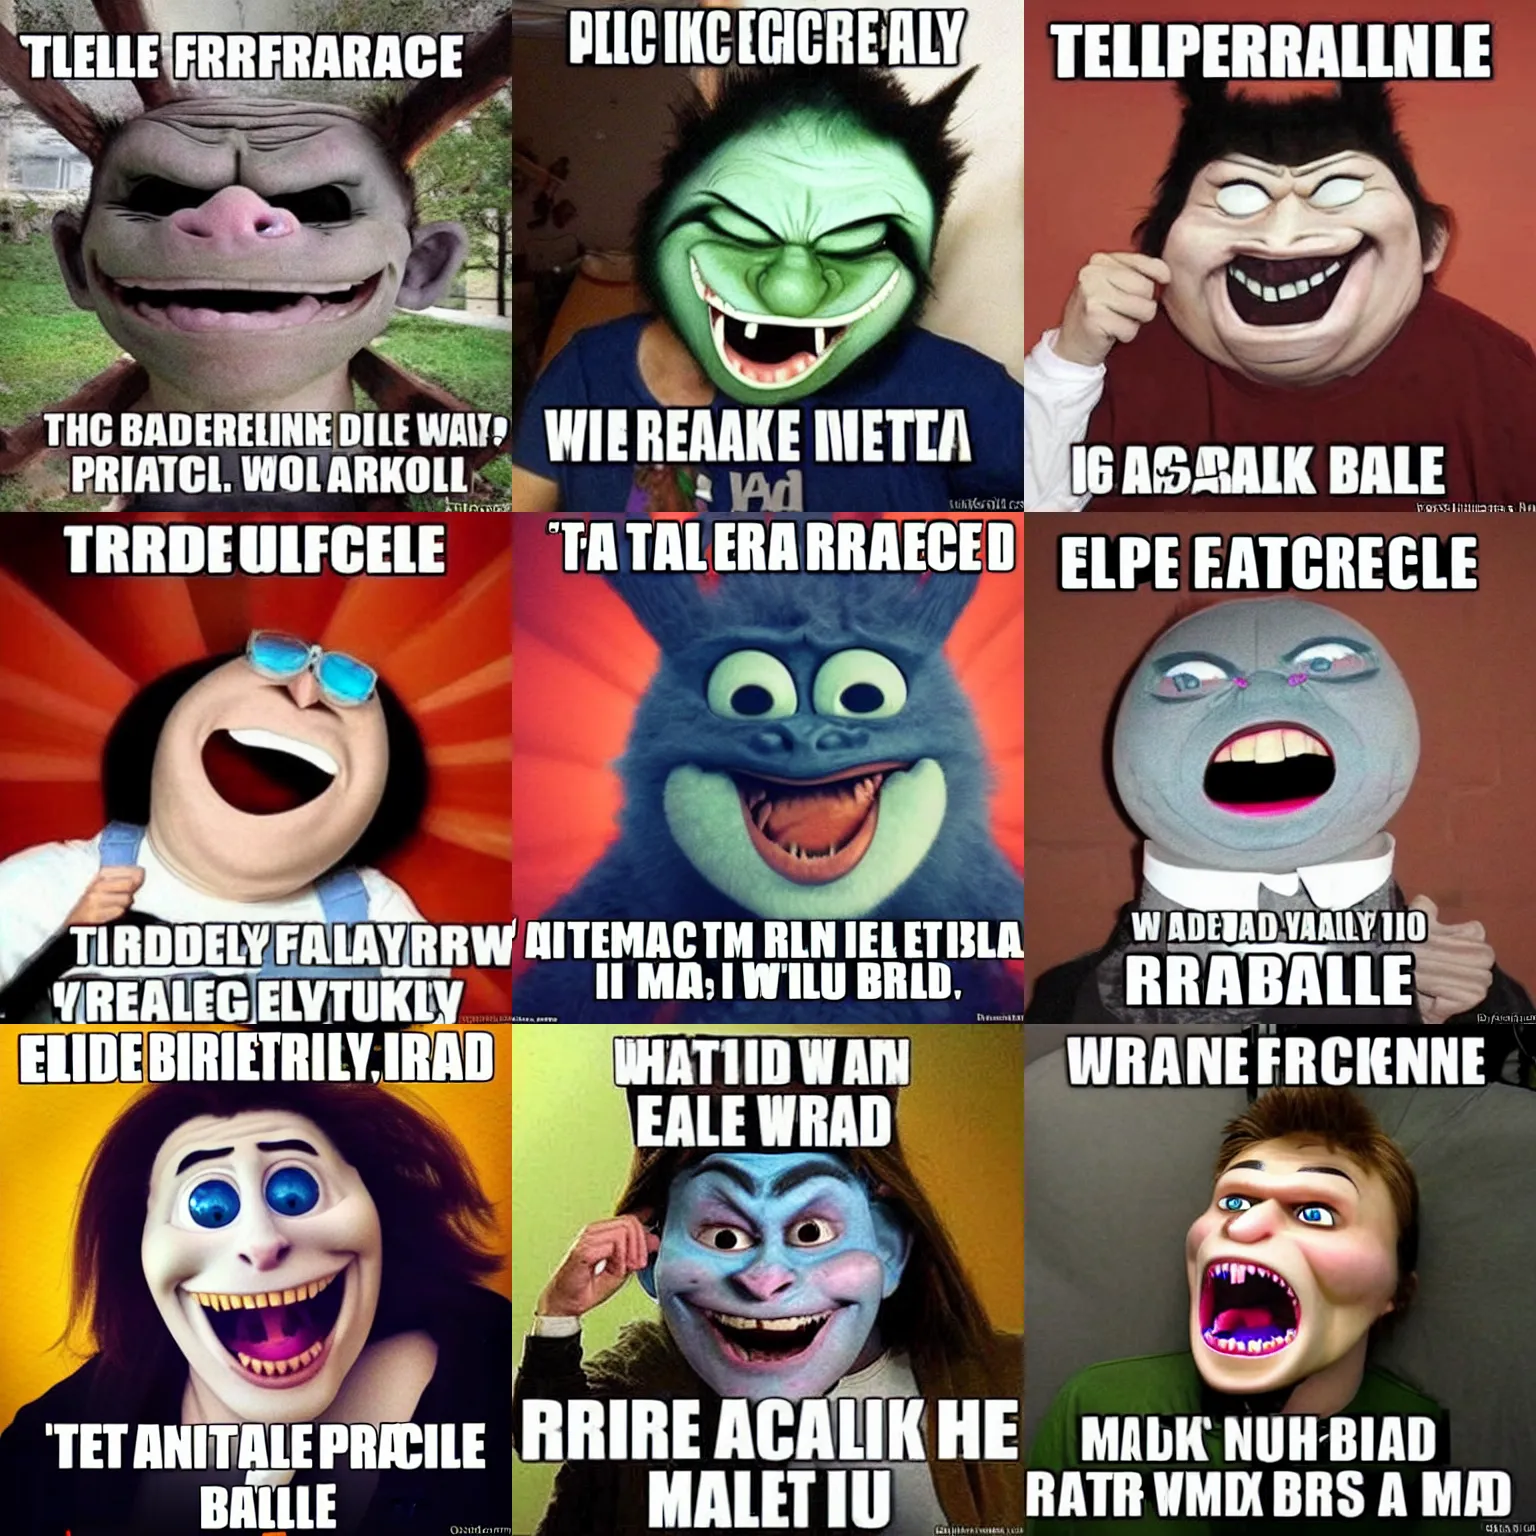 epic troll face is epic [This is supposed to be making fun of the